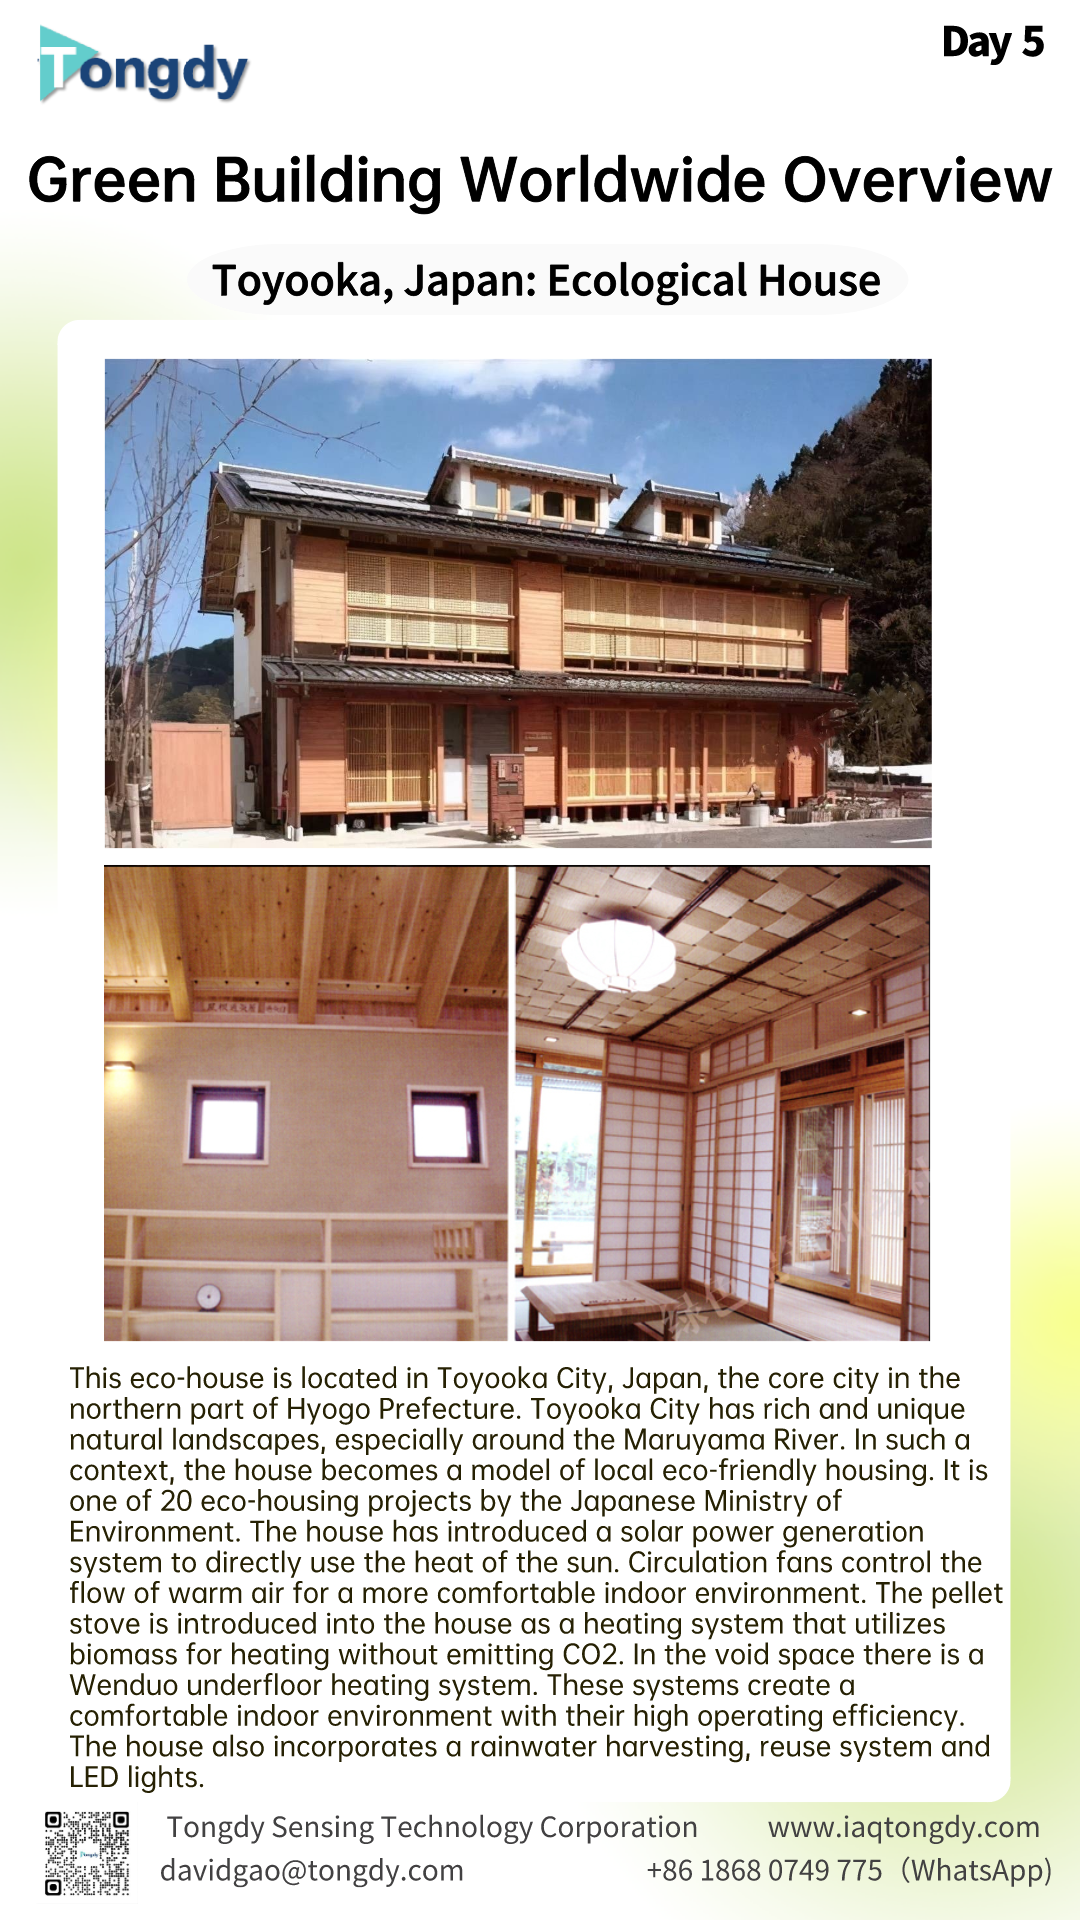 Green Building Worldwide Overview——Toyooka, Japan: Ecological House